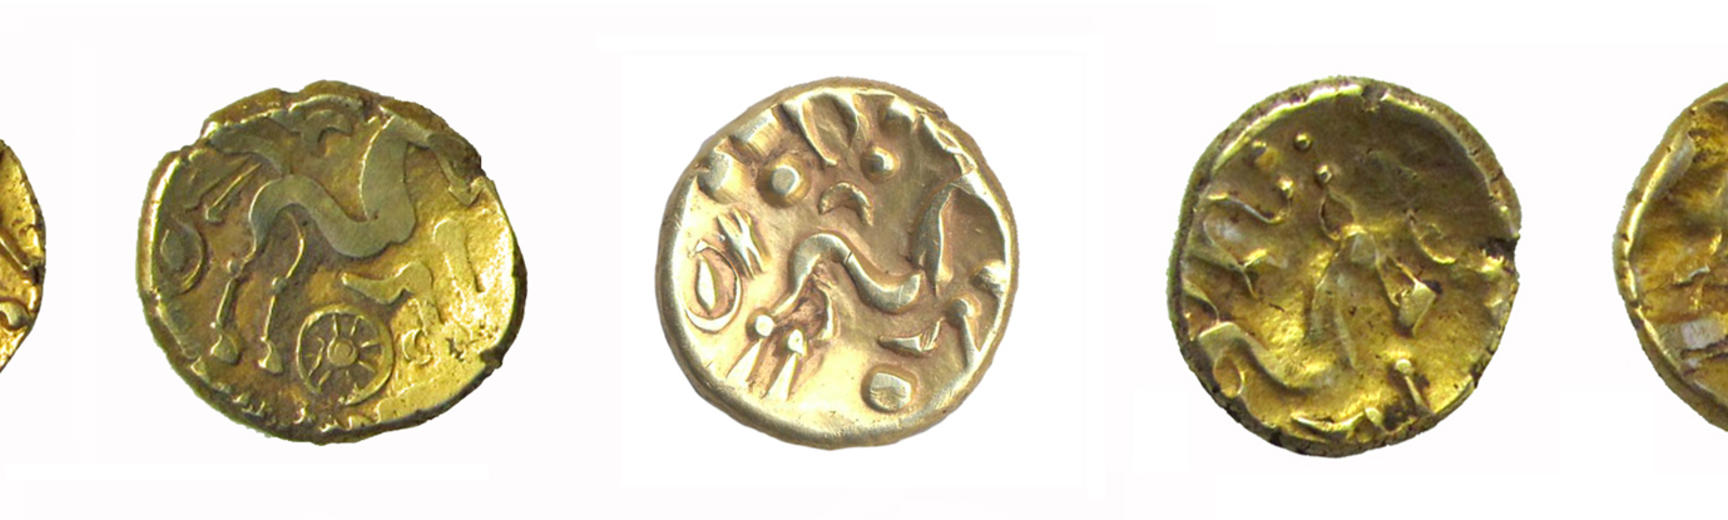 Five Iron Age coins